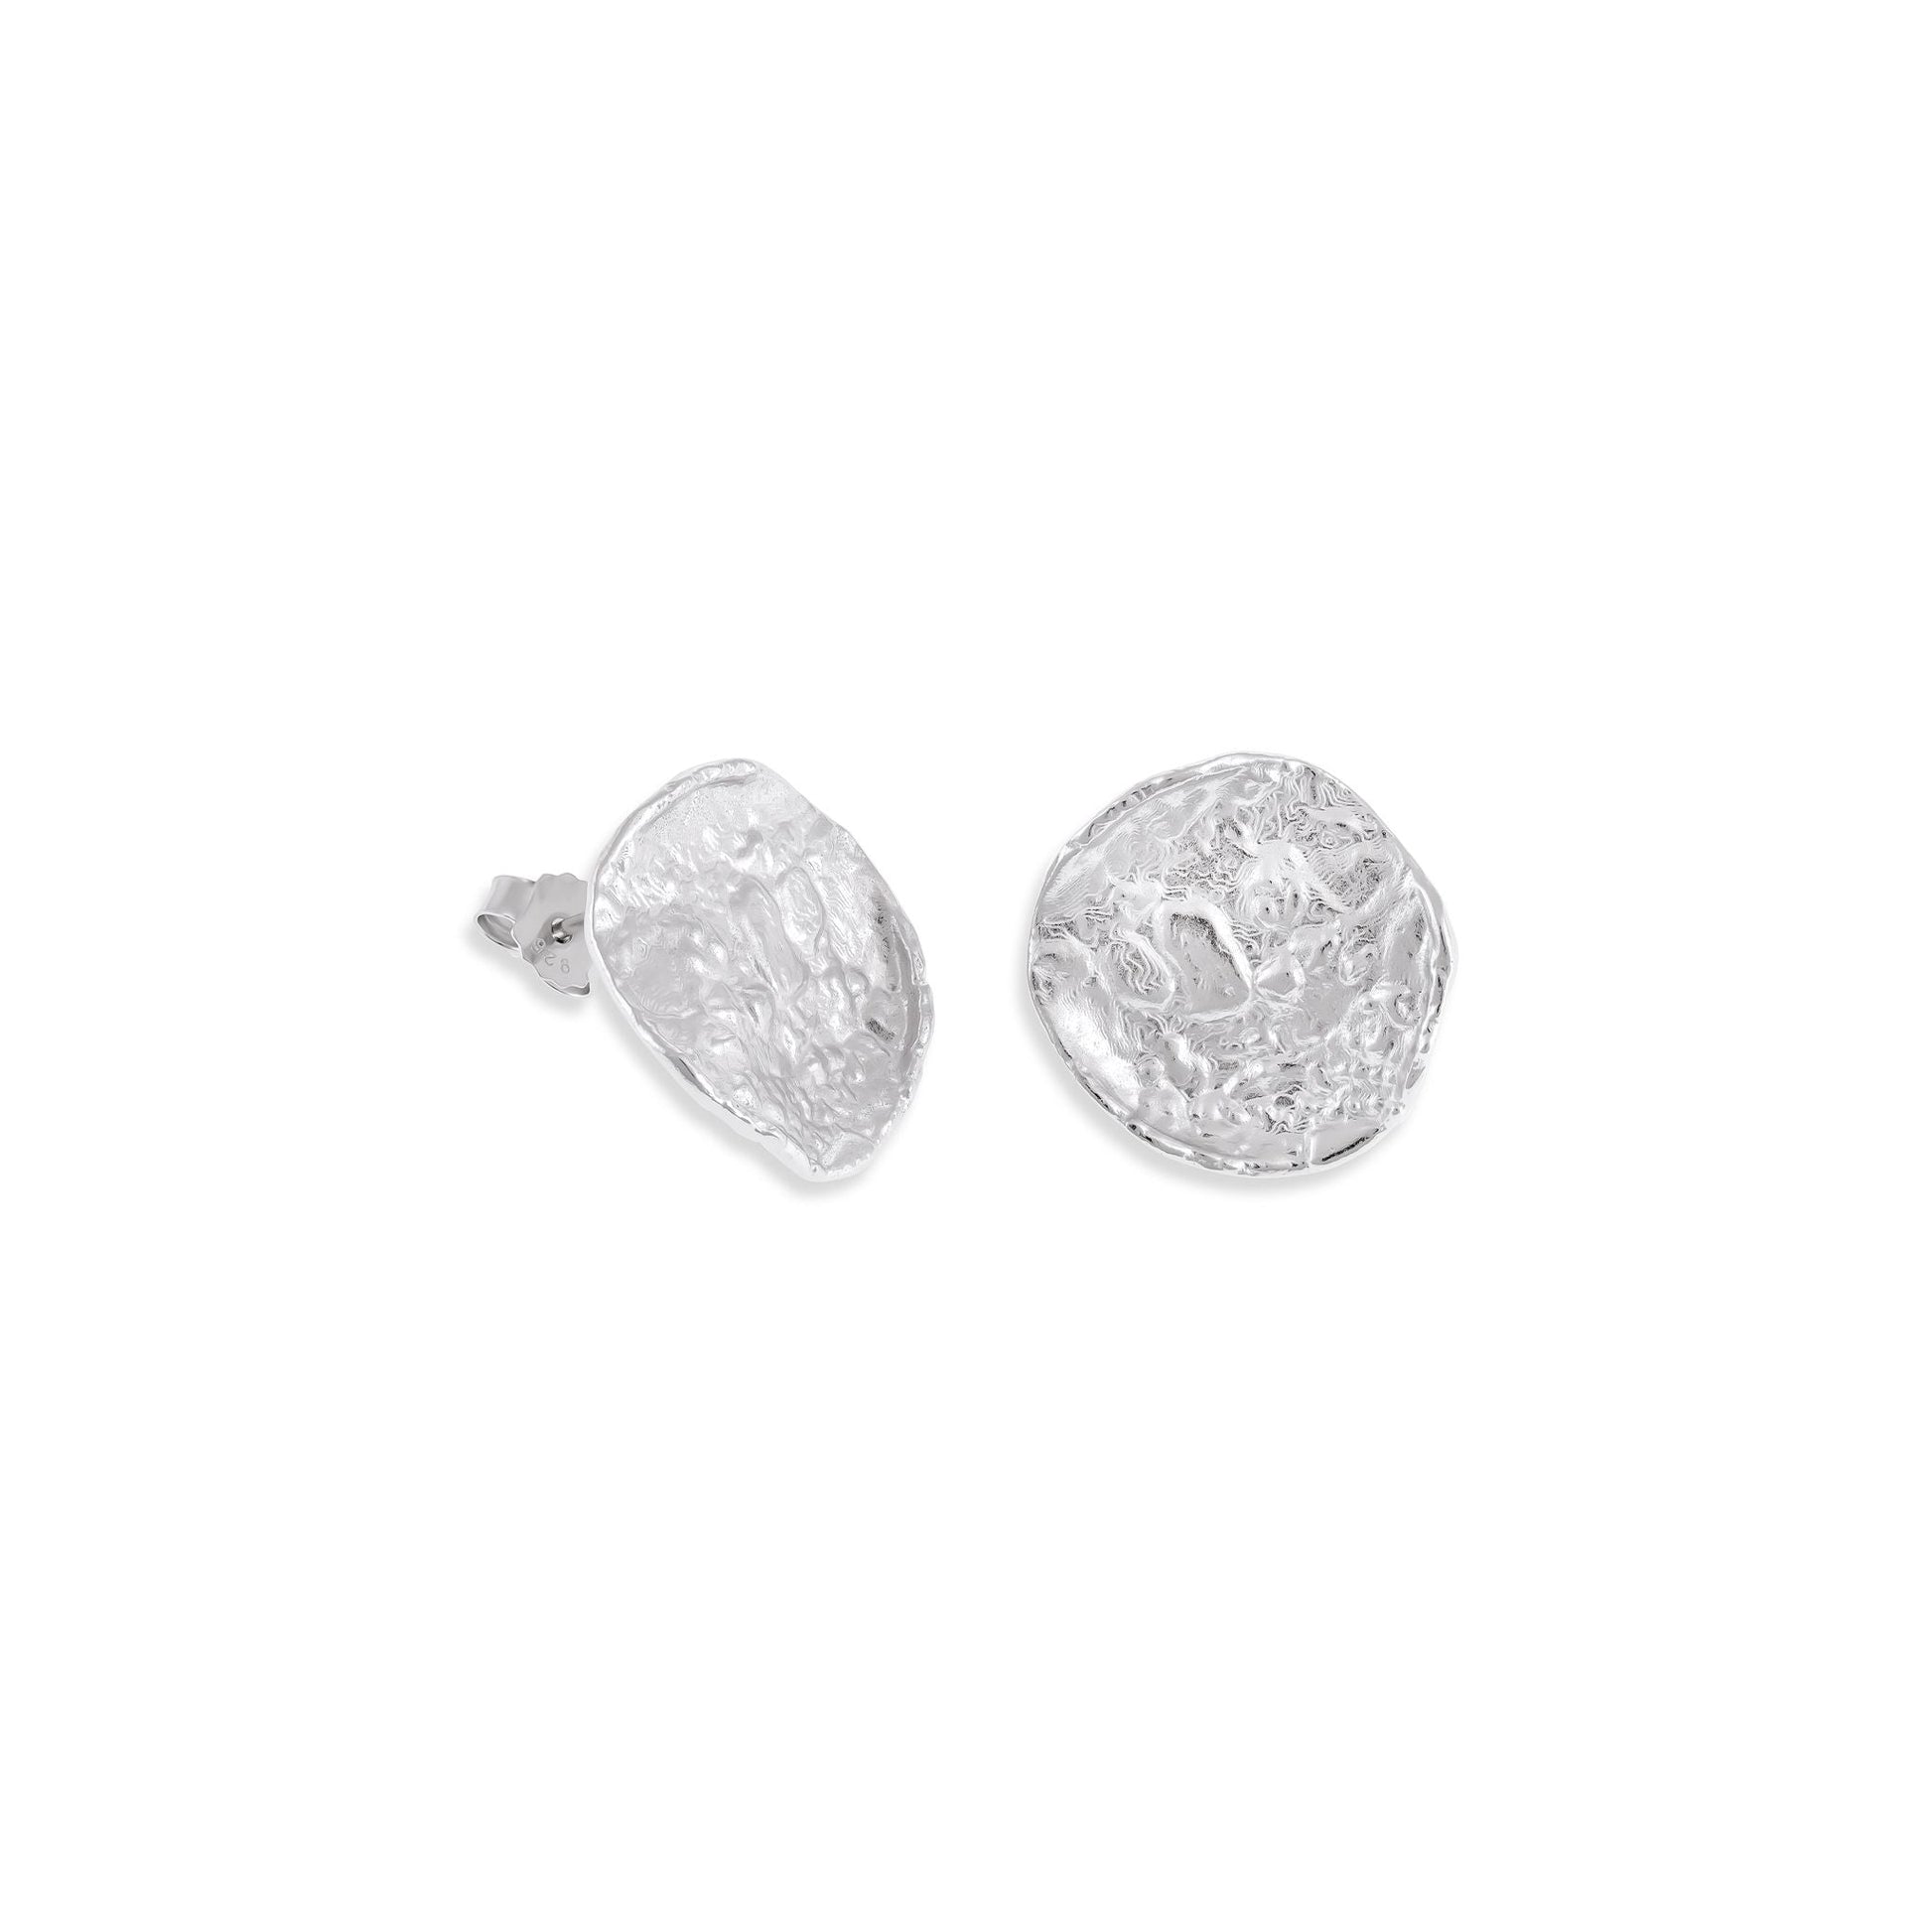 925 sterling silver rhodium plated round nugget earrings SER3001 - FJewellery